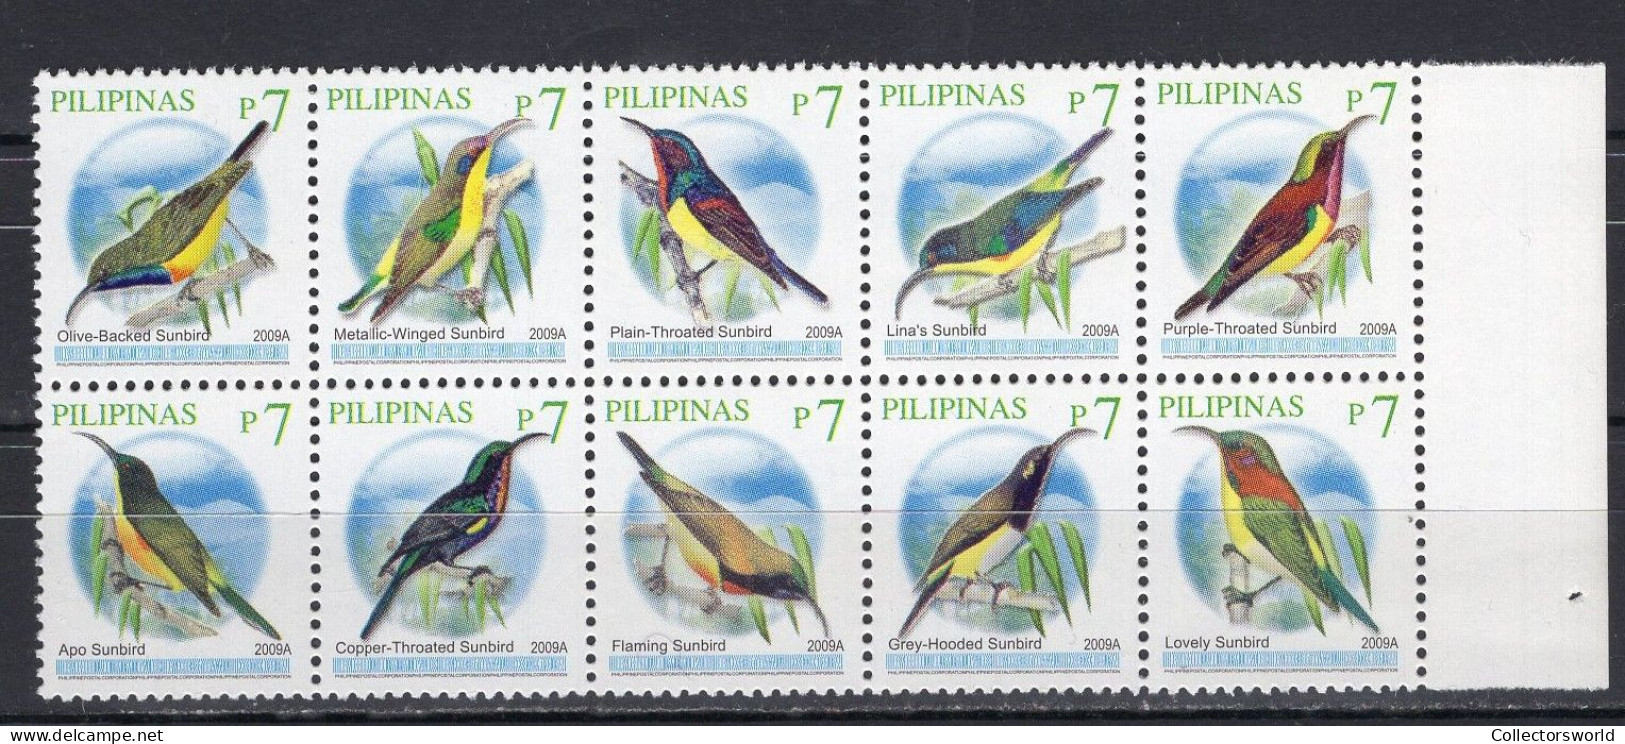 Philippines Serie 10v 2009 Year 2009A On Stamps - Birds Sunbirds MNH - Philippines